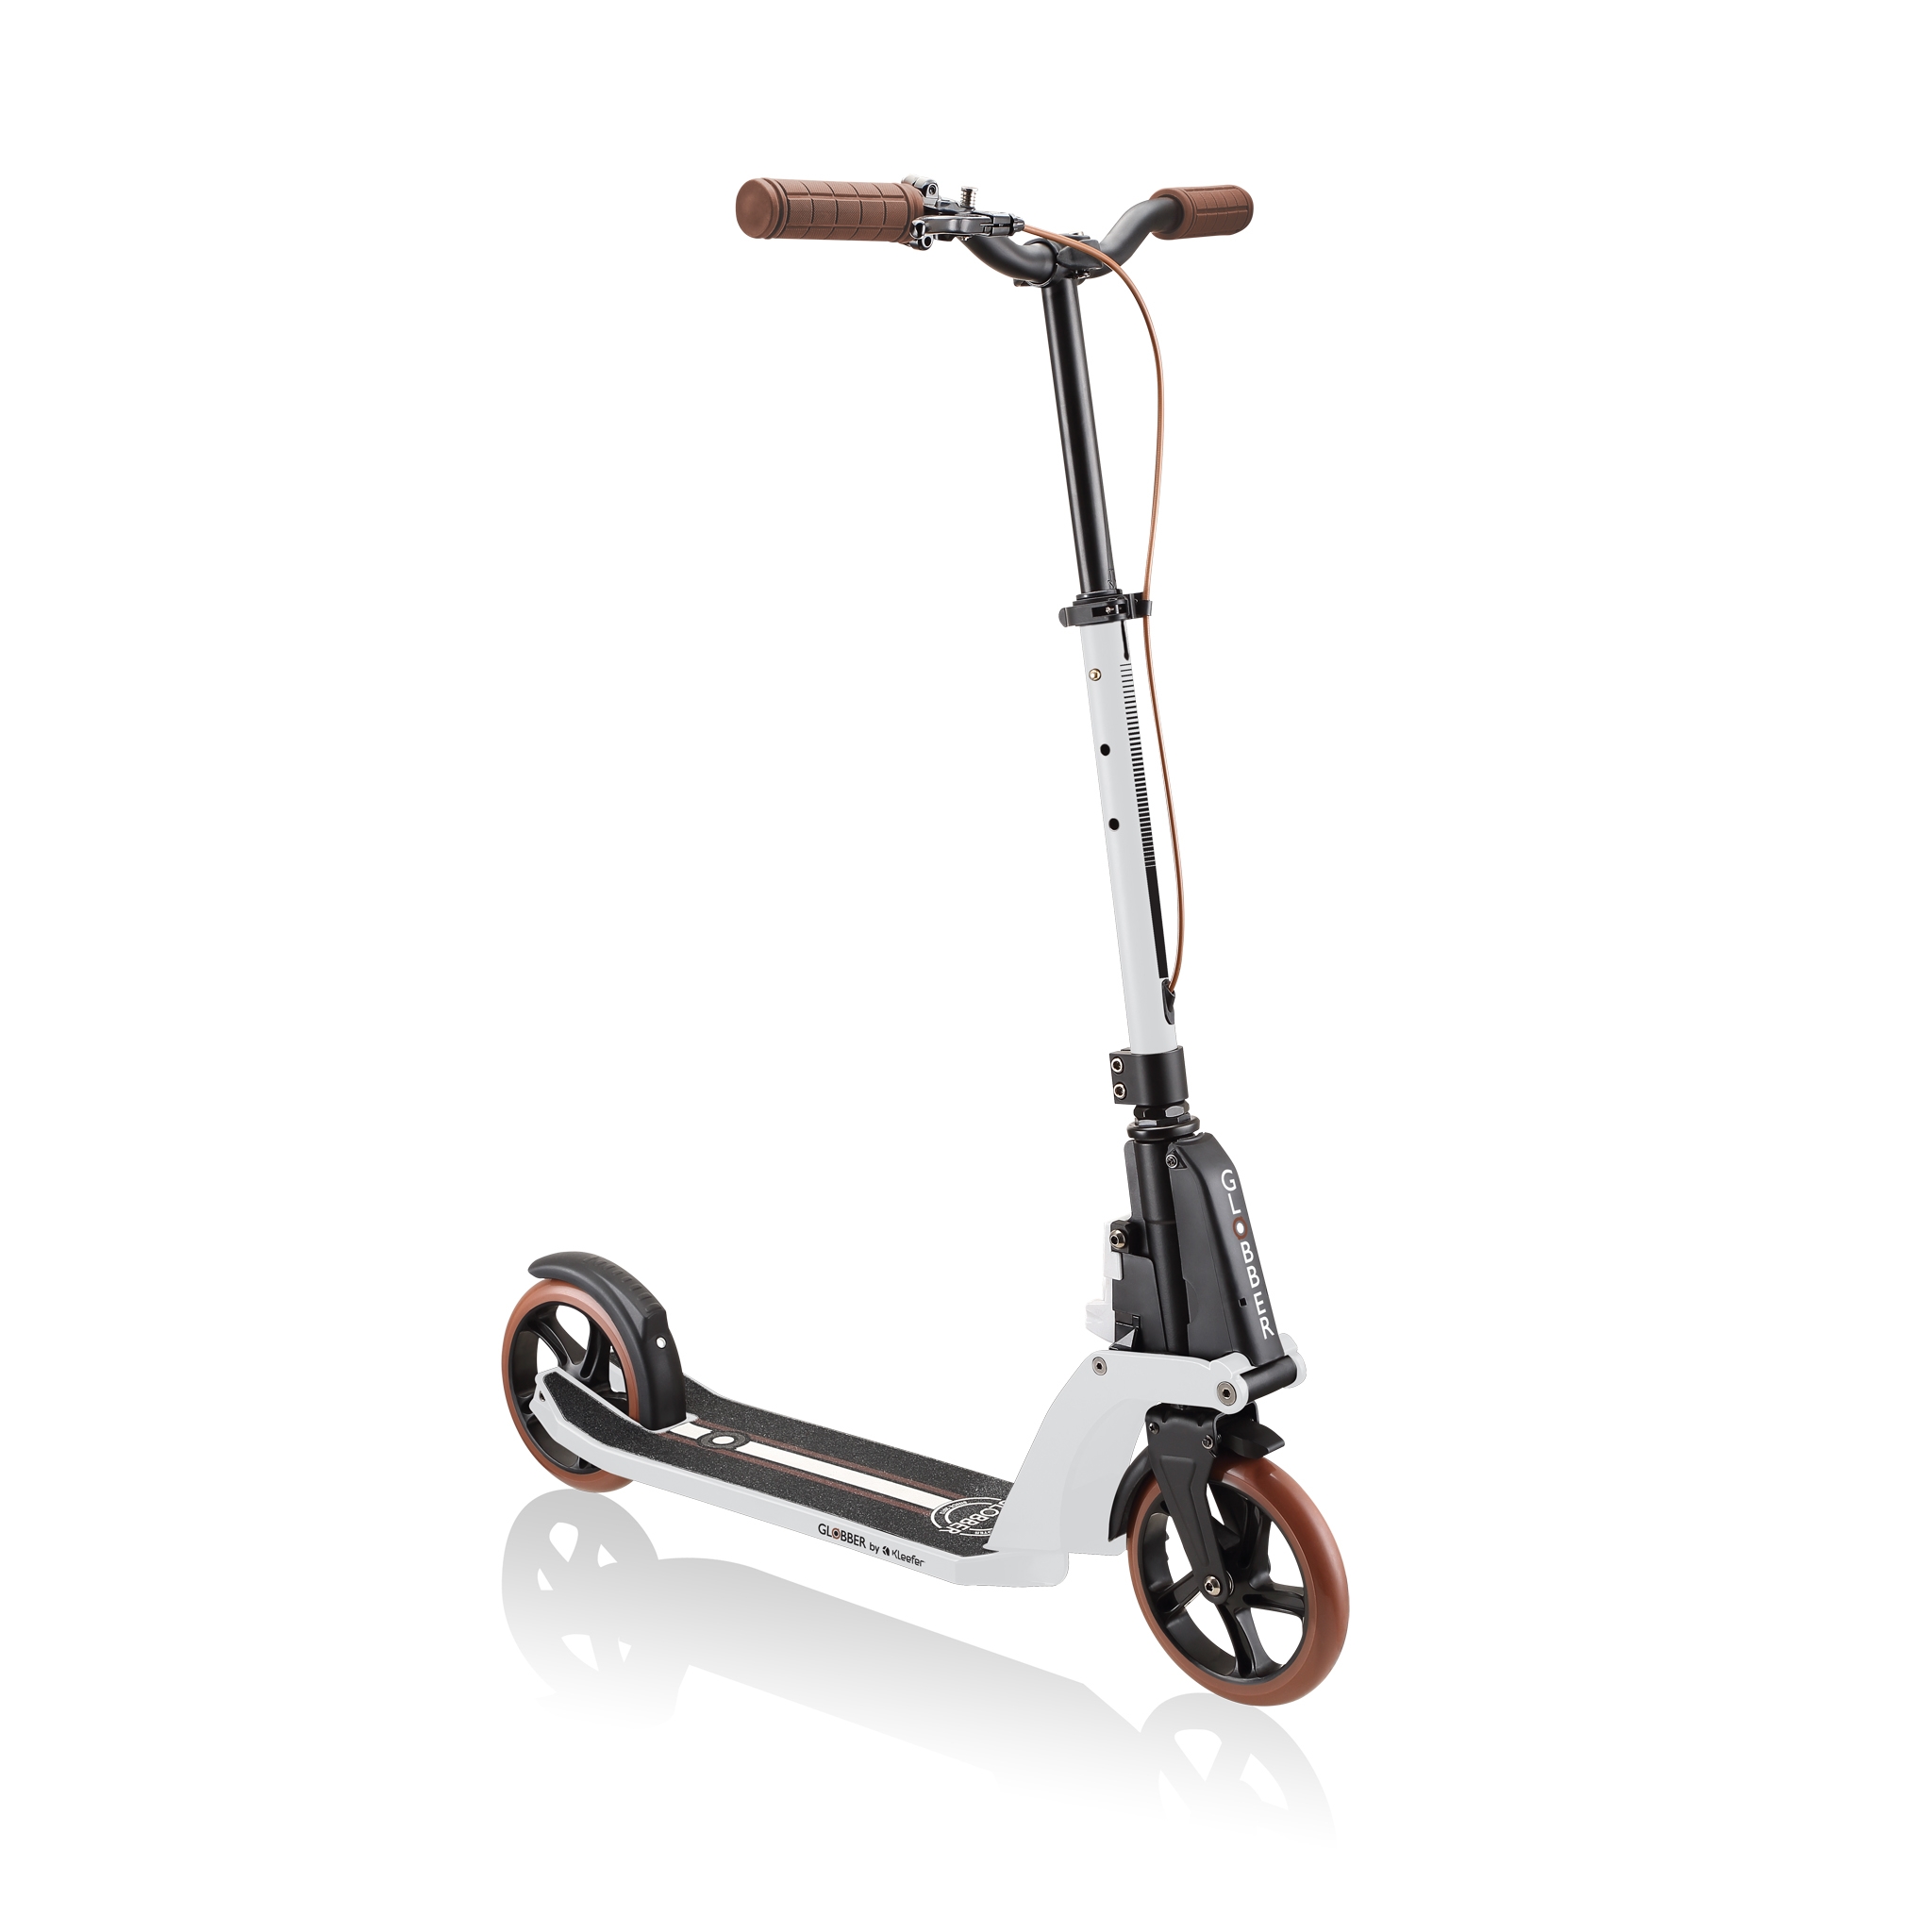 ONE-K-180-PISTON-DELUXE-best-folding-scooter-for-adults 0